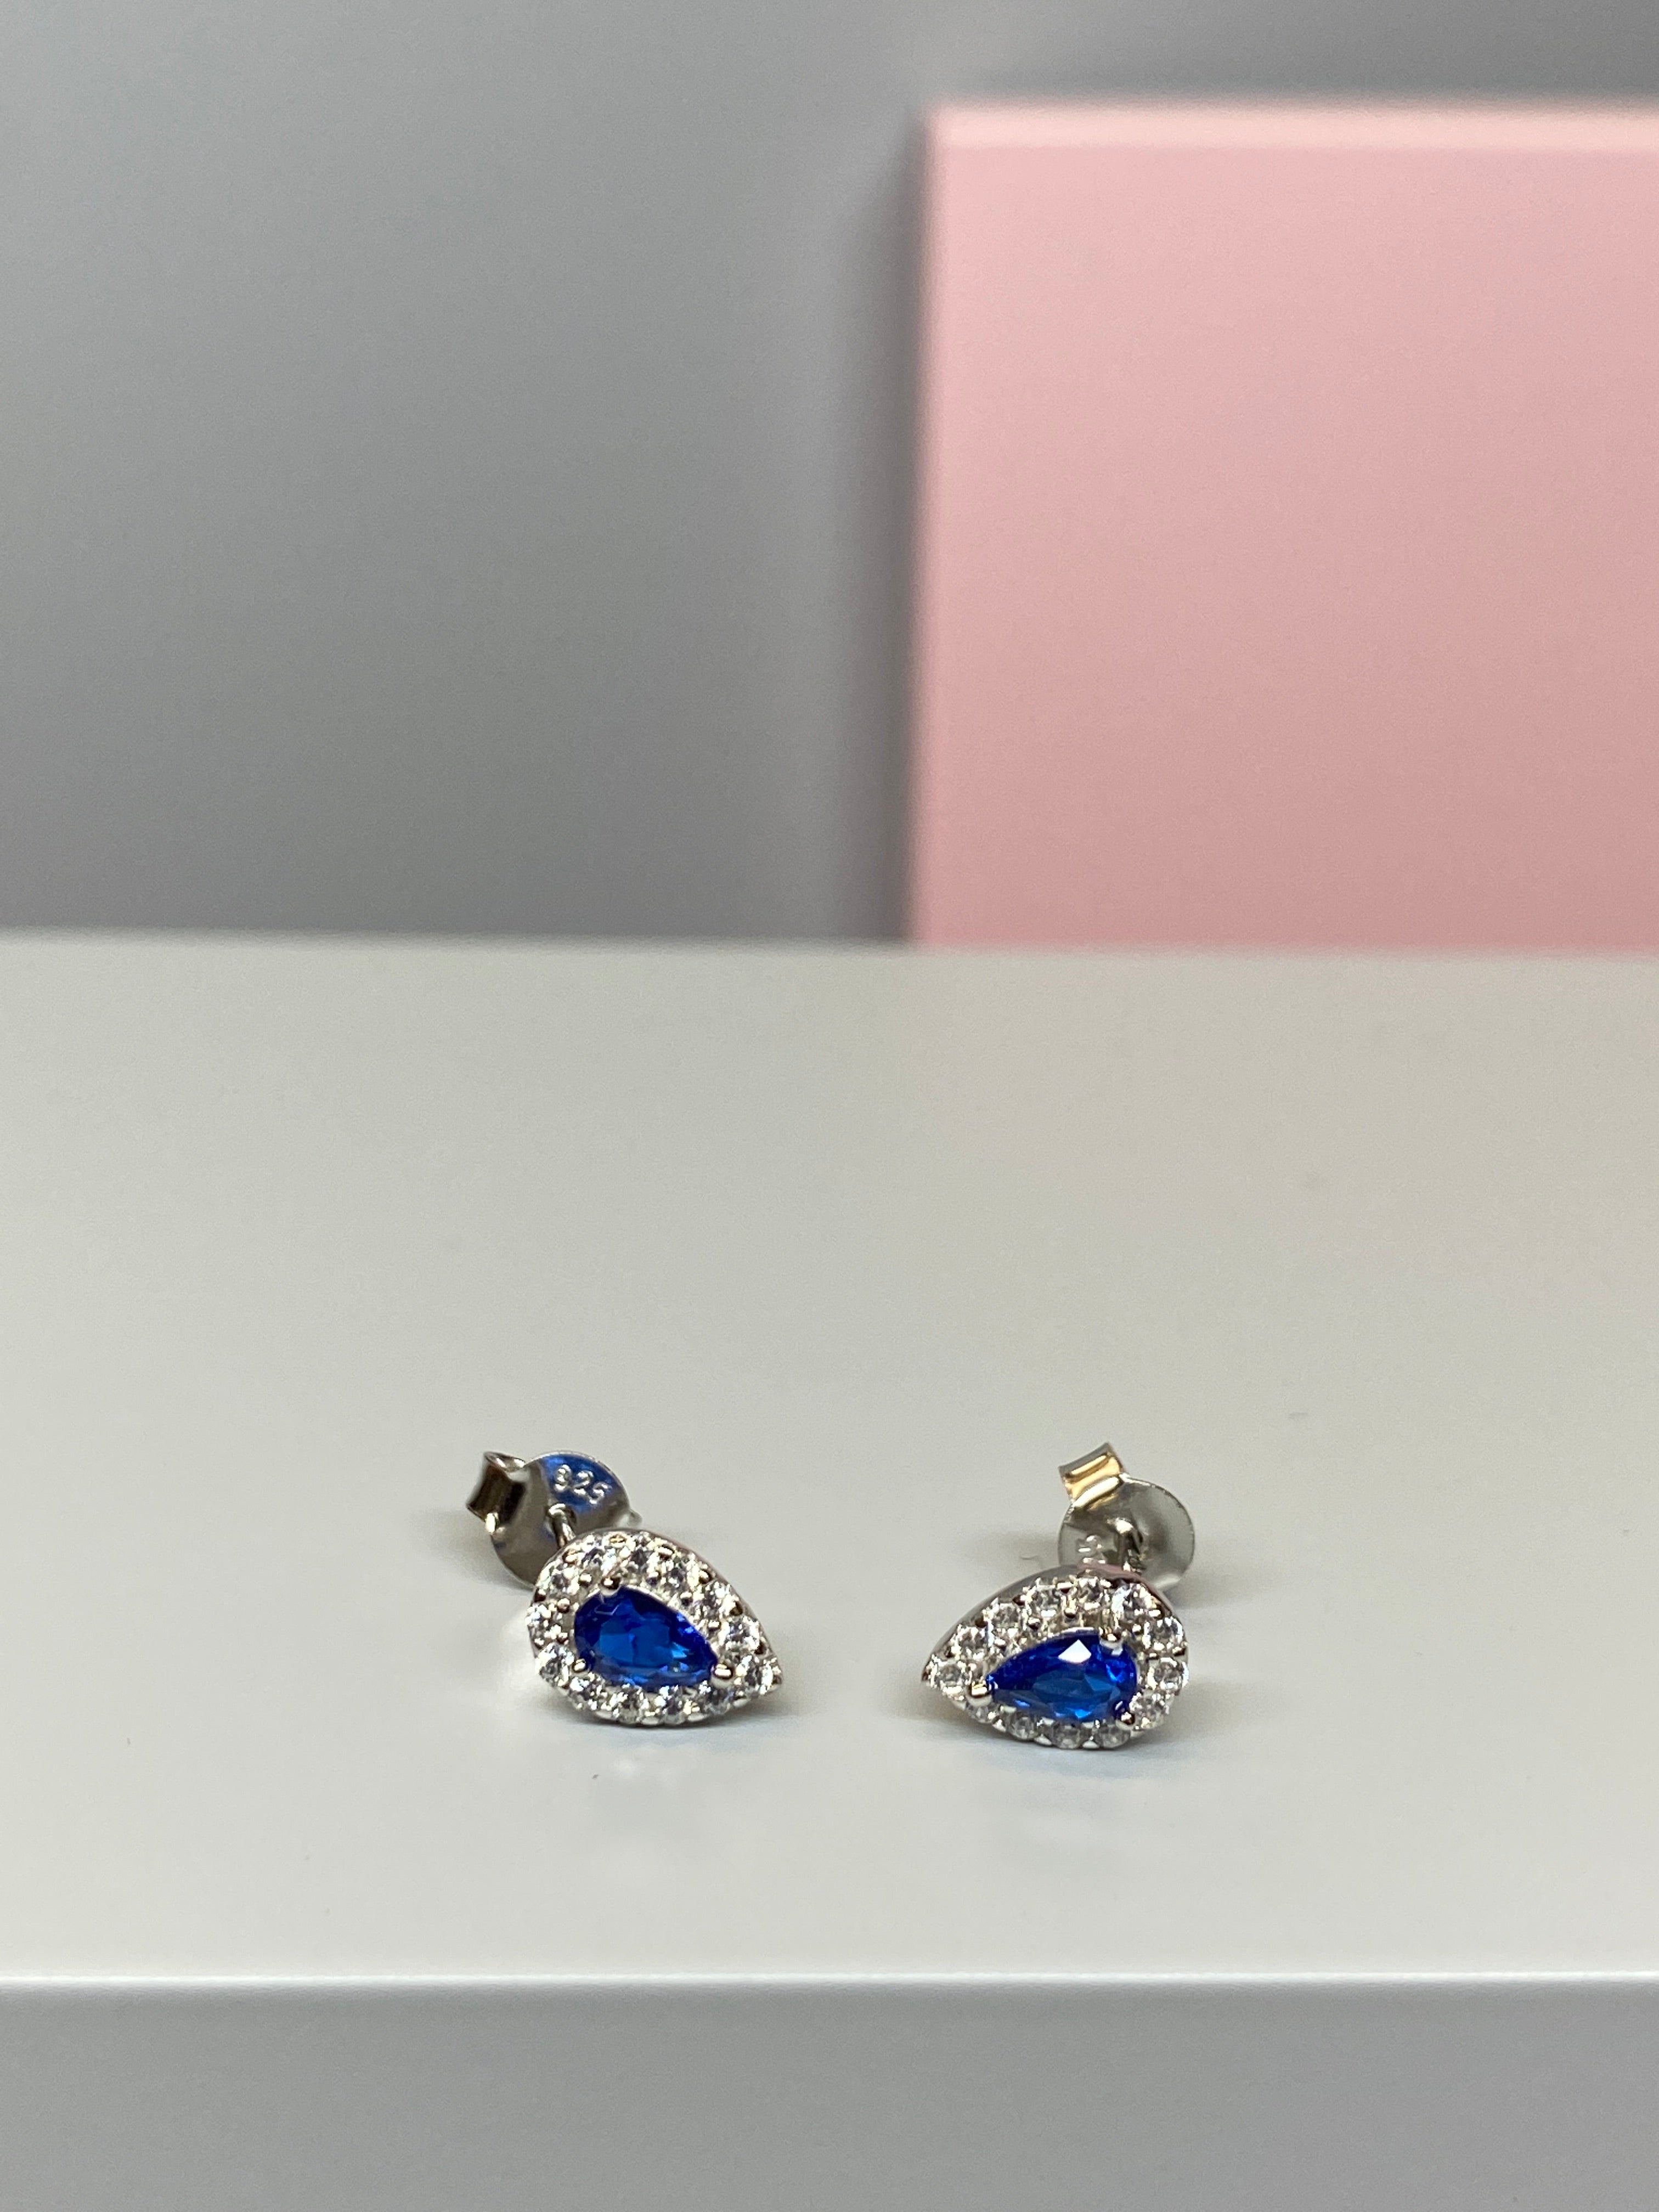 Sterling Silver Pear Shaped Blue and CZ Earrings - Hallmark Jewellers Formby & The Jewellers Bench Widnes